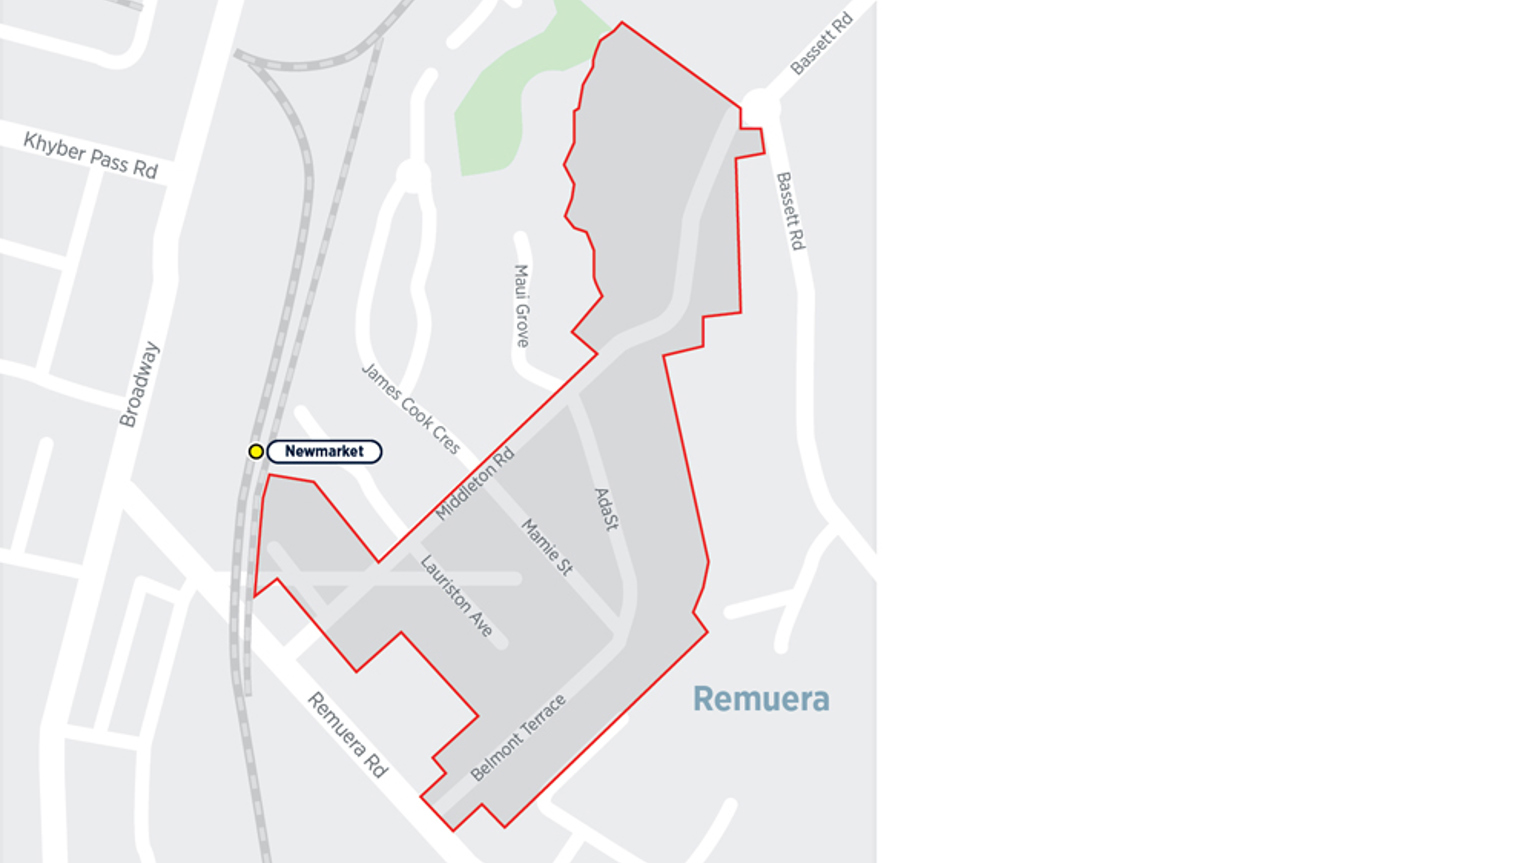 Map of Remuera with the resident parking zone boundaries indicated with red lines.